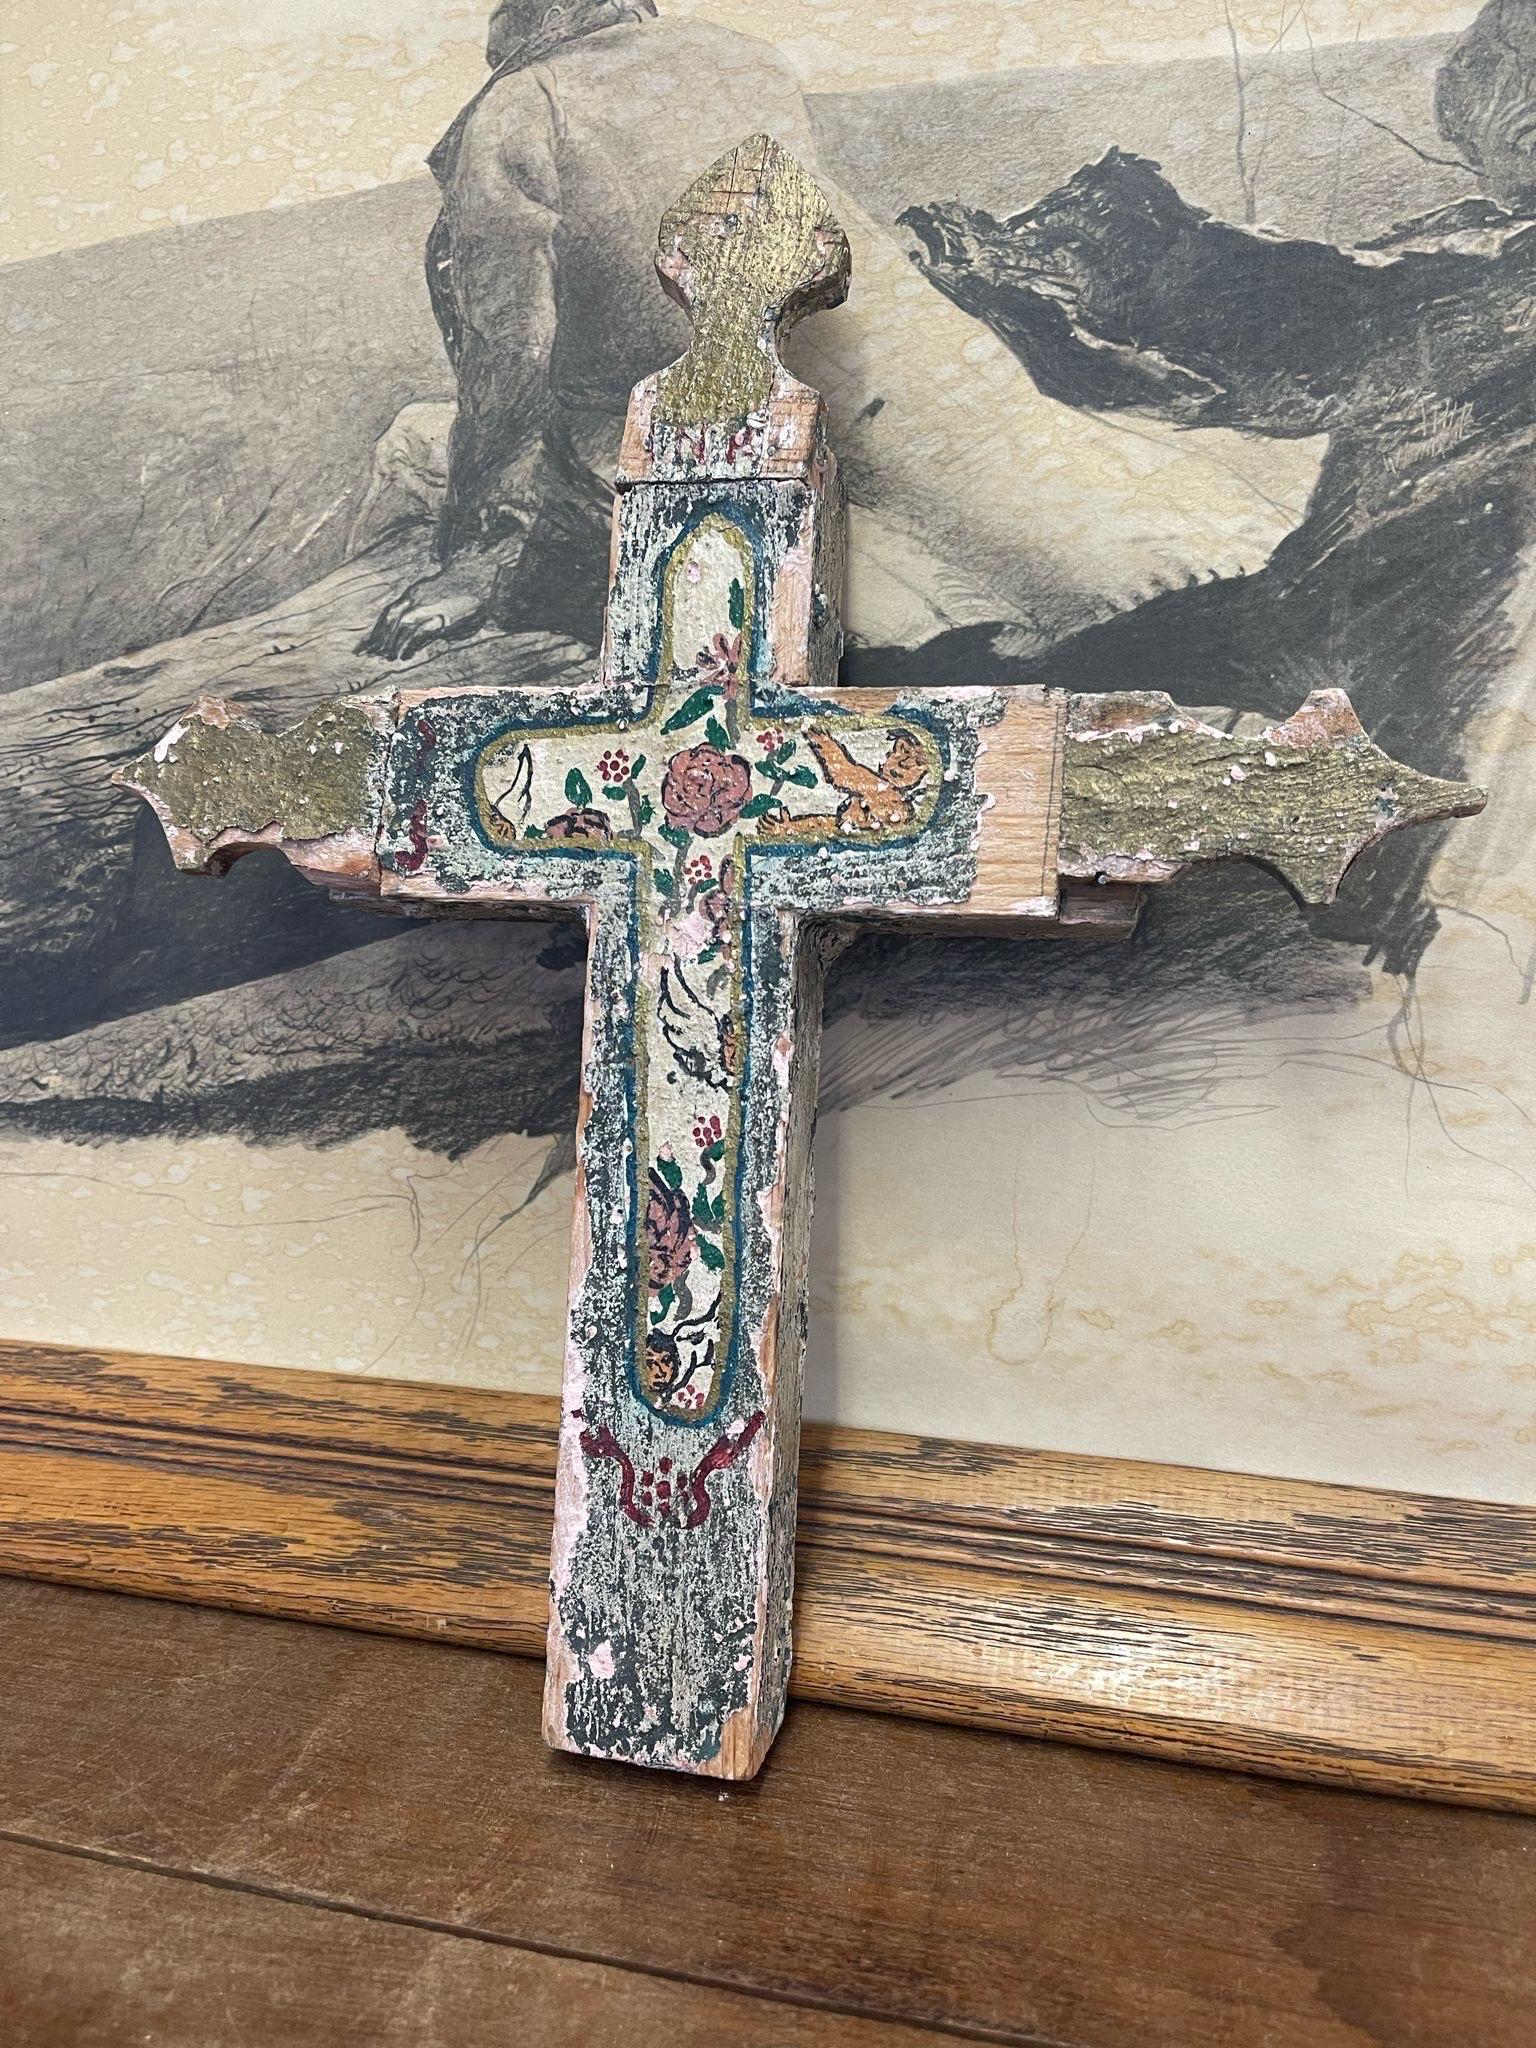 Cross with Beautiful Aging and Petina to the Paint and Wood. Floral and Angel Motifs. Pink and Green Toned Color,with Gold Tones at the Tip of the Cross. Possibly of Mexican Origin. Vintage Condition Consistent with Age as Pictured.

Dimensions. 12